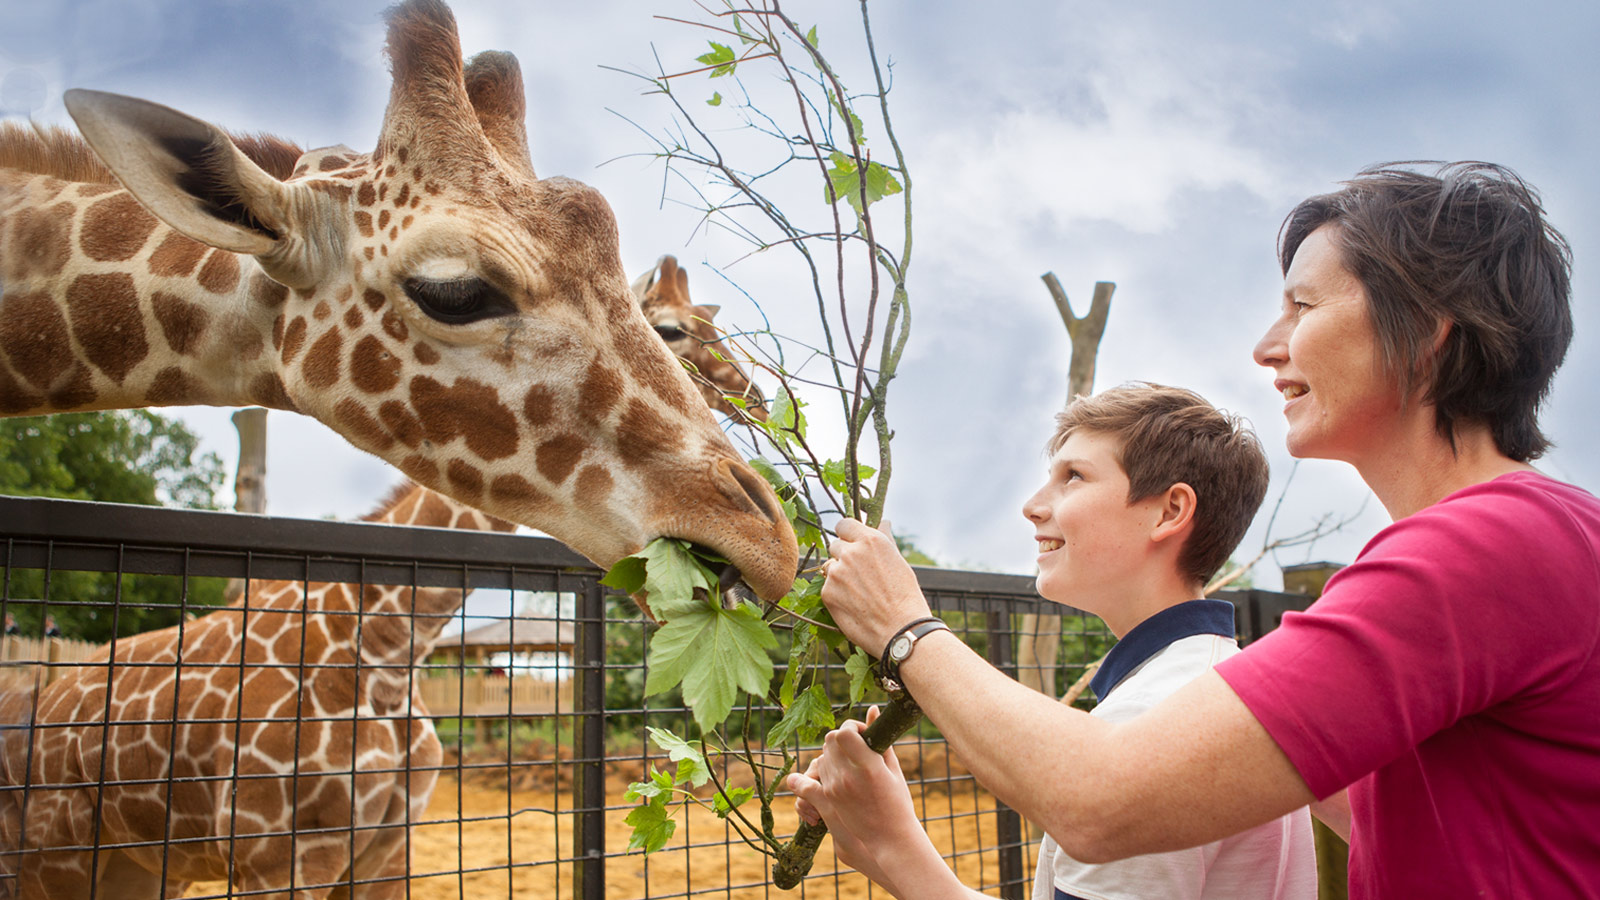 Meet The Animals At ZSL Whipsnade Zoo | Zoological Society of London (ZSL)